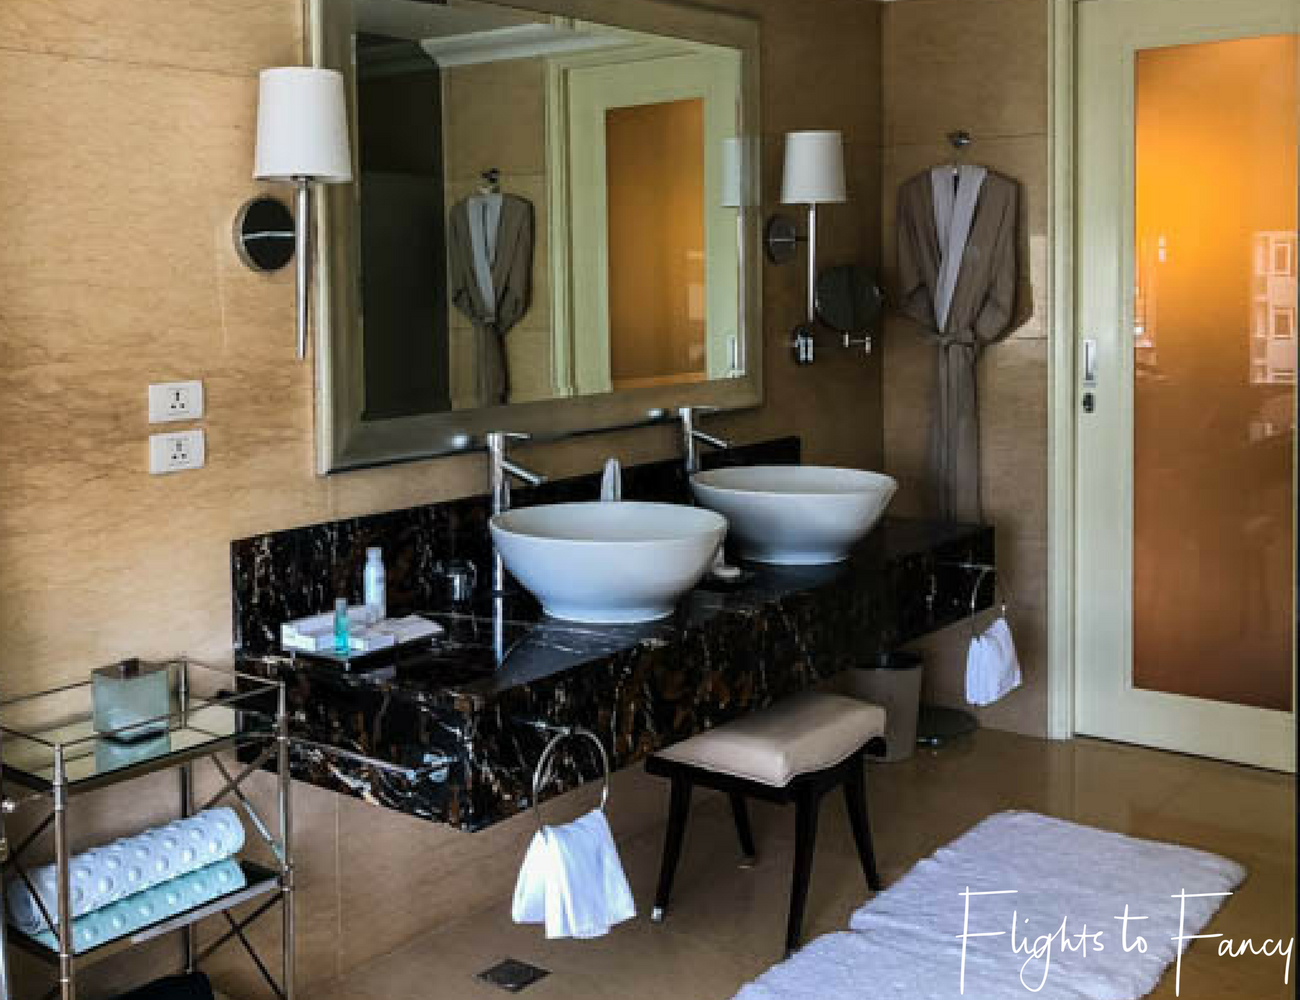 Flights To Fancy at Raffles Makati Manila - His and hers basins in the 5 star bathroom